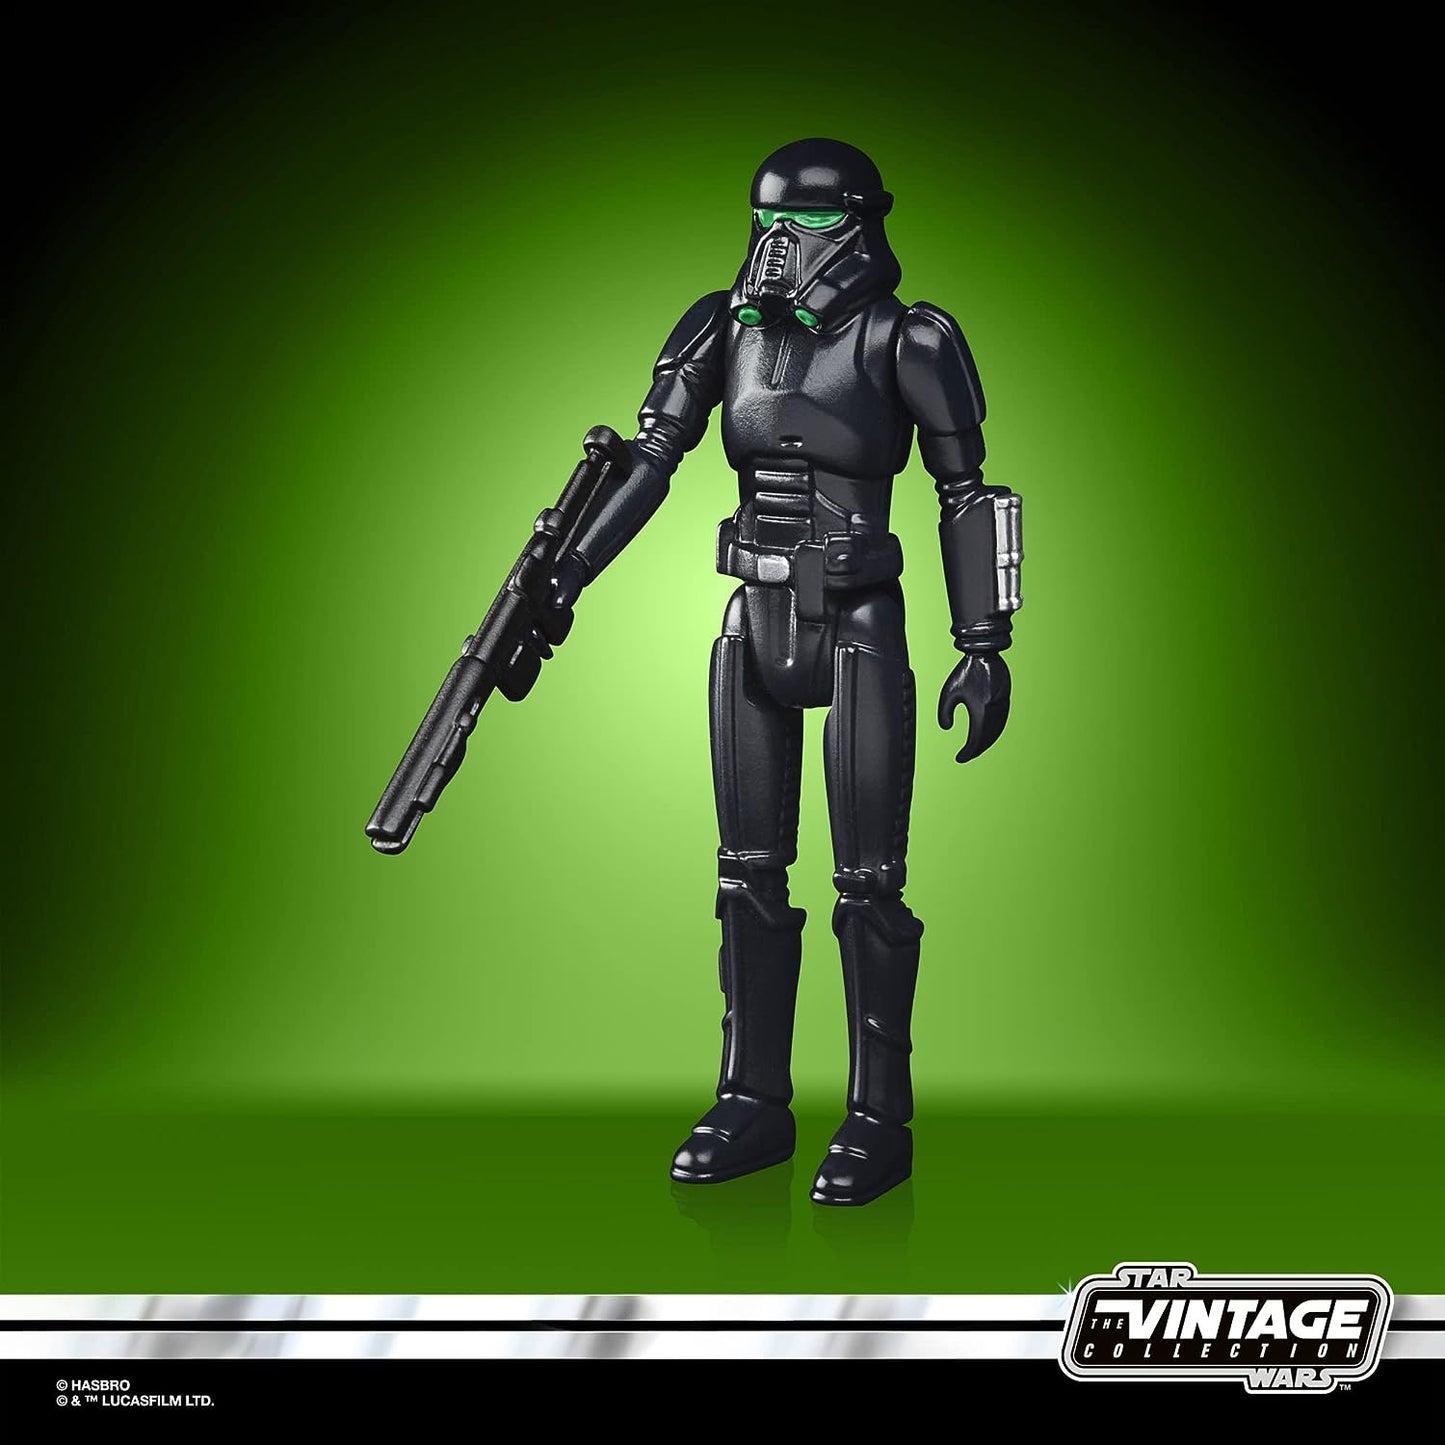 STAR WARS Retro Collection Imperial Death Trooper Toy 3.75-Inch-Scale The Mandalorian Collectible Action Figure